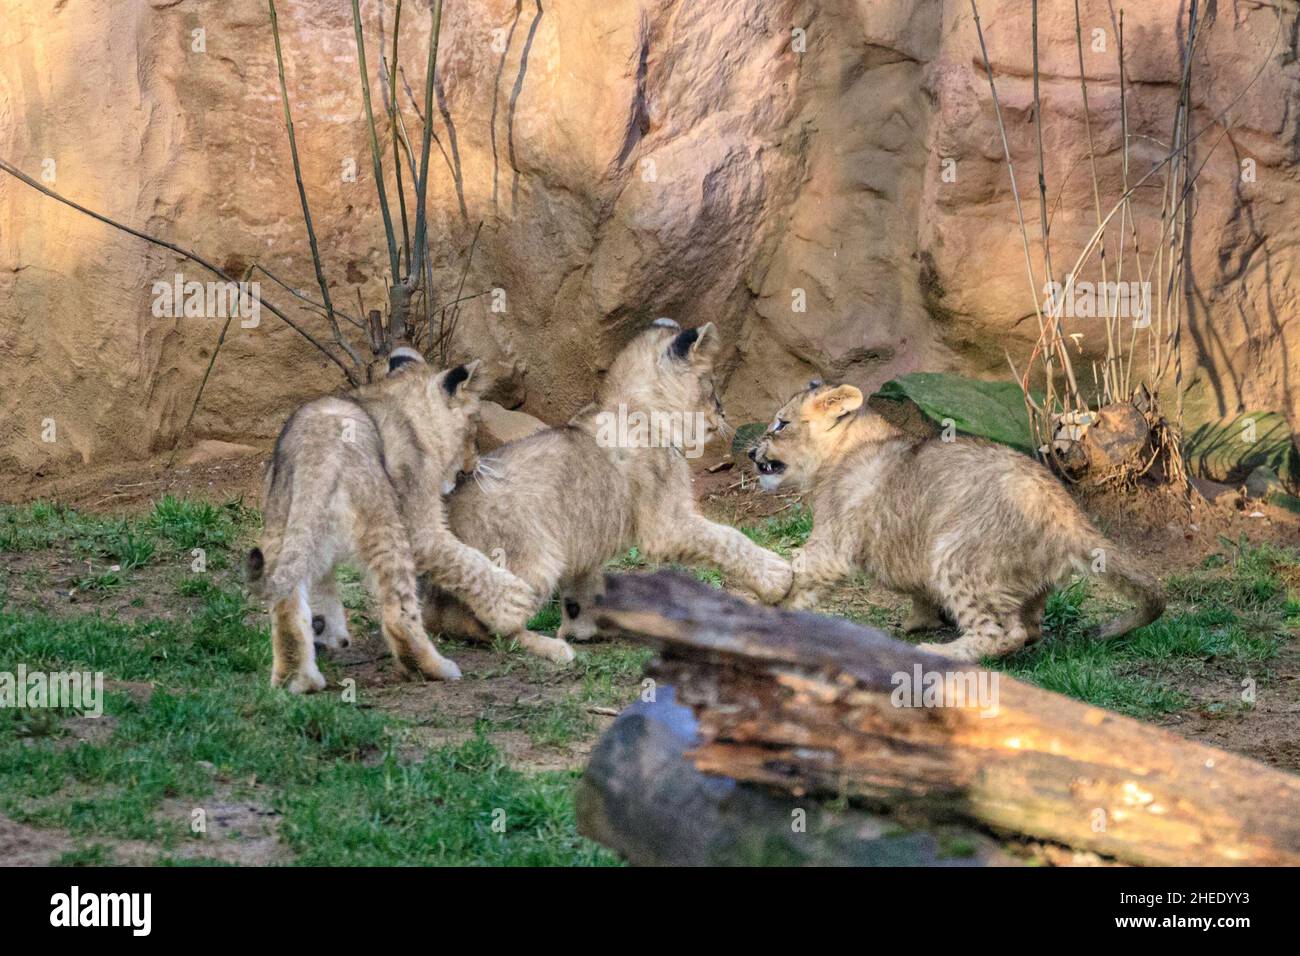 Recklinghausen, NRW, Germany. 10th Jan, 2022. Tthe African Lion triplets (Panthera leo) play in the sun. The three adventurous lion cubs, Jamila, Kumani und Malaika were born in October to mum Fiona and father Bantu, and have now gradually been introduced to the outside enclousures and public view, but can retreat to privacy when they want to at Recklinghausen's Zoom Erlebniswelt, a modern zoo recreating natural habitats built on an area of more than 30 hectares. Credit: Imageplotter/Alamy Live News Stock Photo